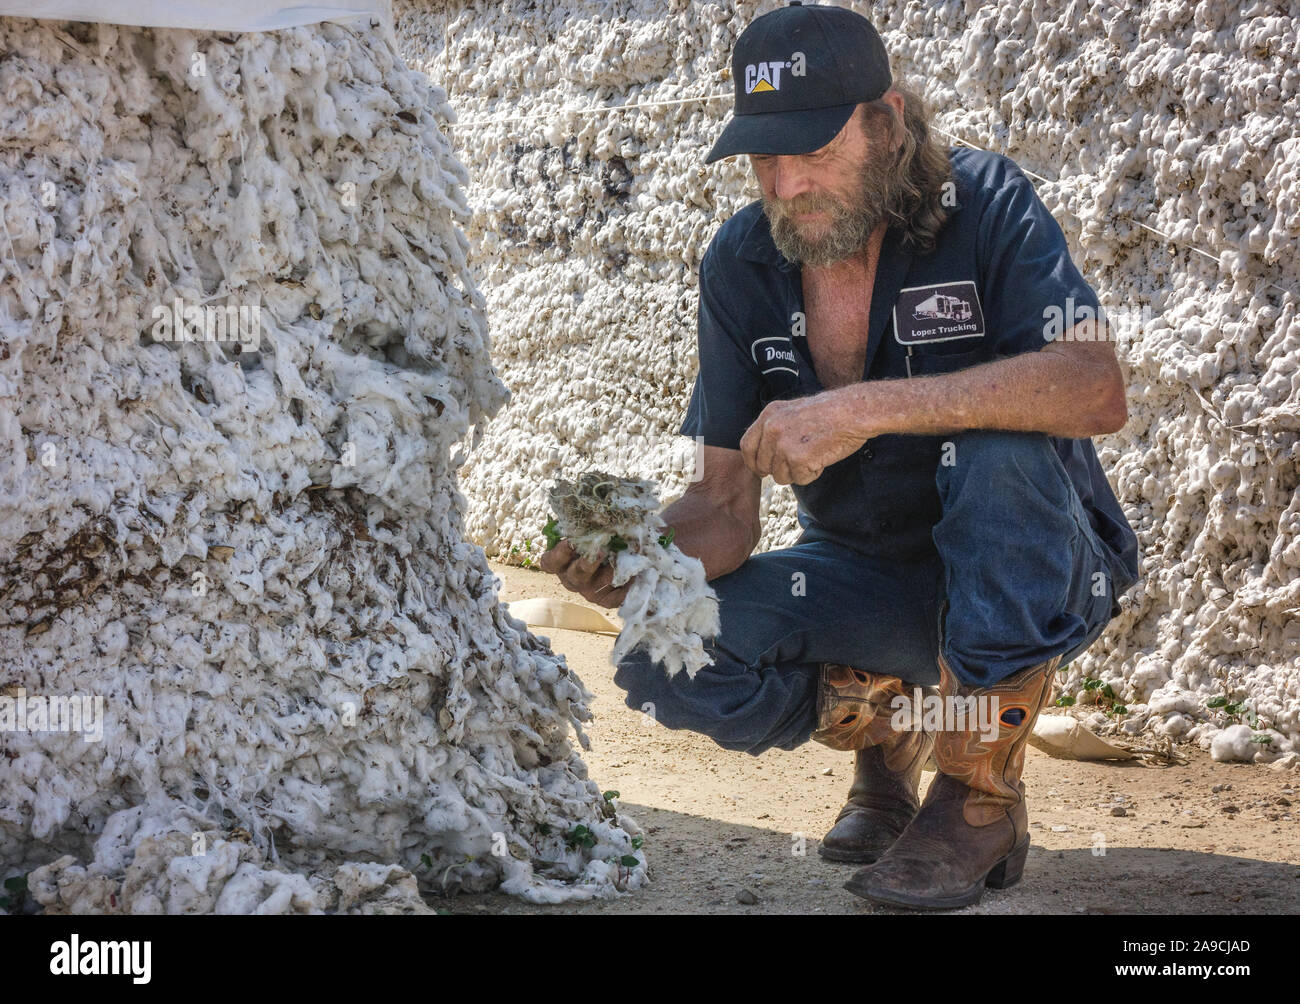 Truck driver Donald Brawley pulls ruined cotton from a module at the United Agricultural Cooperative gin after Hurricane Harvey in Danevang, Texas. Stock Photo